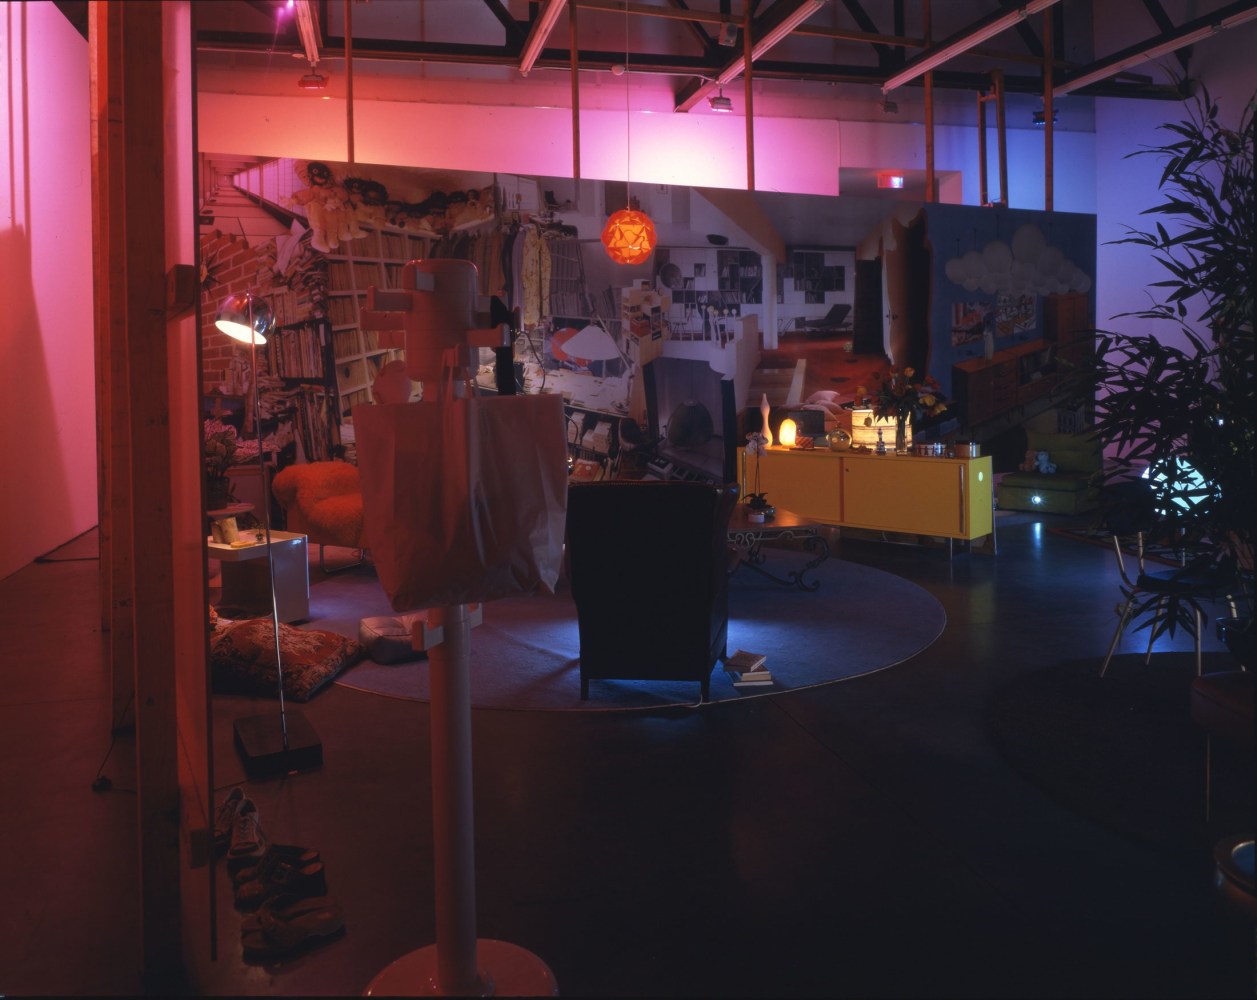 Pipilotti Rist
Himalaya&amp;#39;s Sister&amp;#39;s Living Room, New York, 2000
7 projectors, 7 players in and around furniture and various objects, mounted wallpaper on wood, audio system
Dimensions variable
Installation view
April 8 &amp;ndash; May 27, 2000
Luhring Augustine, New York